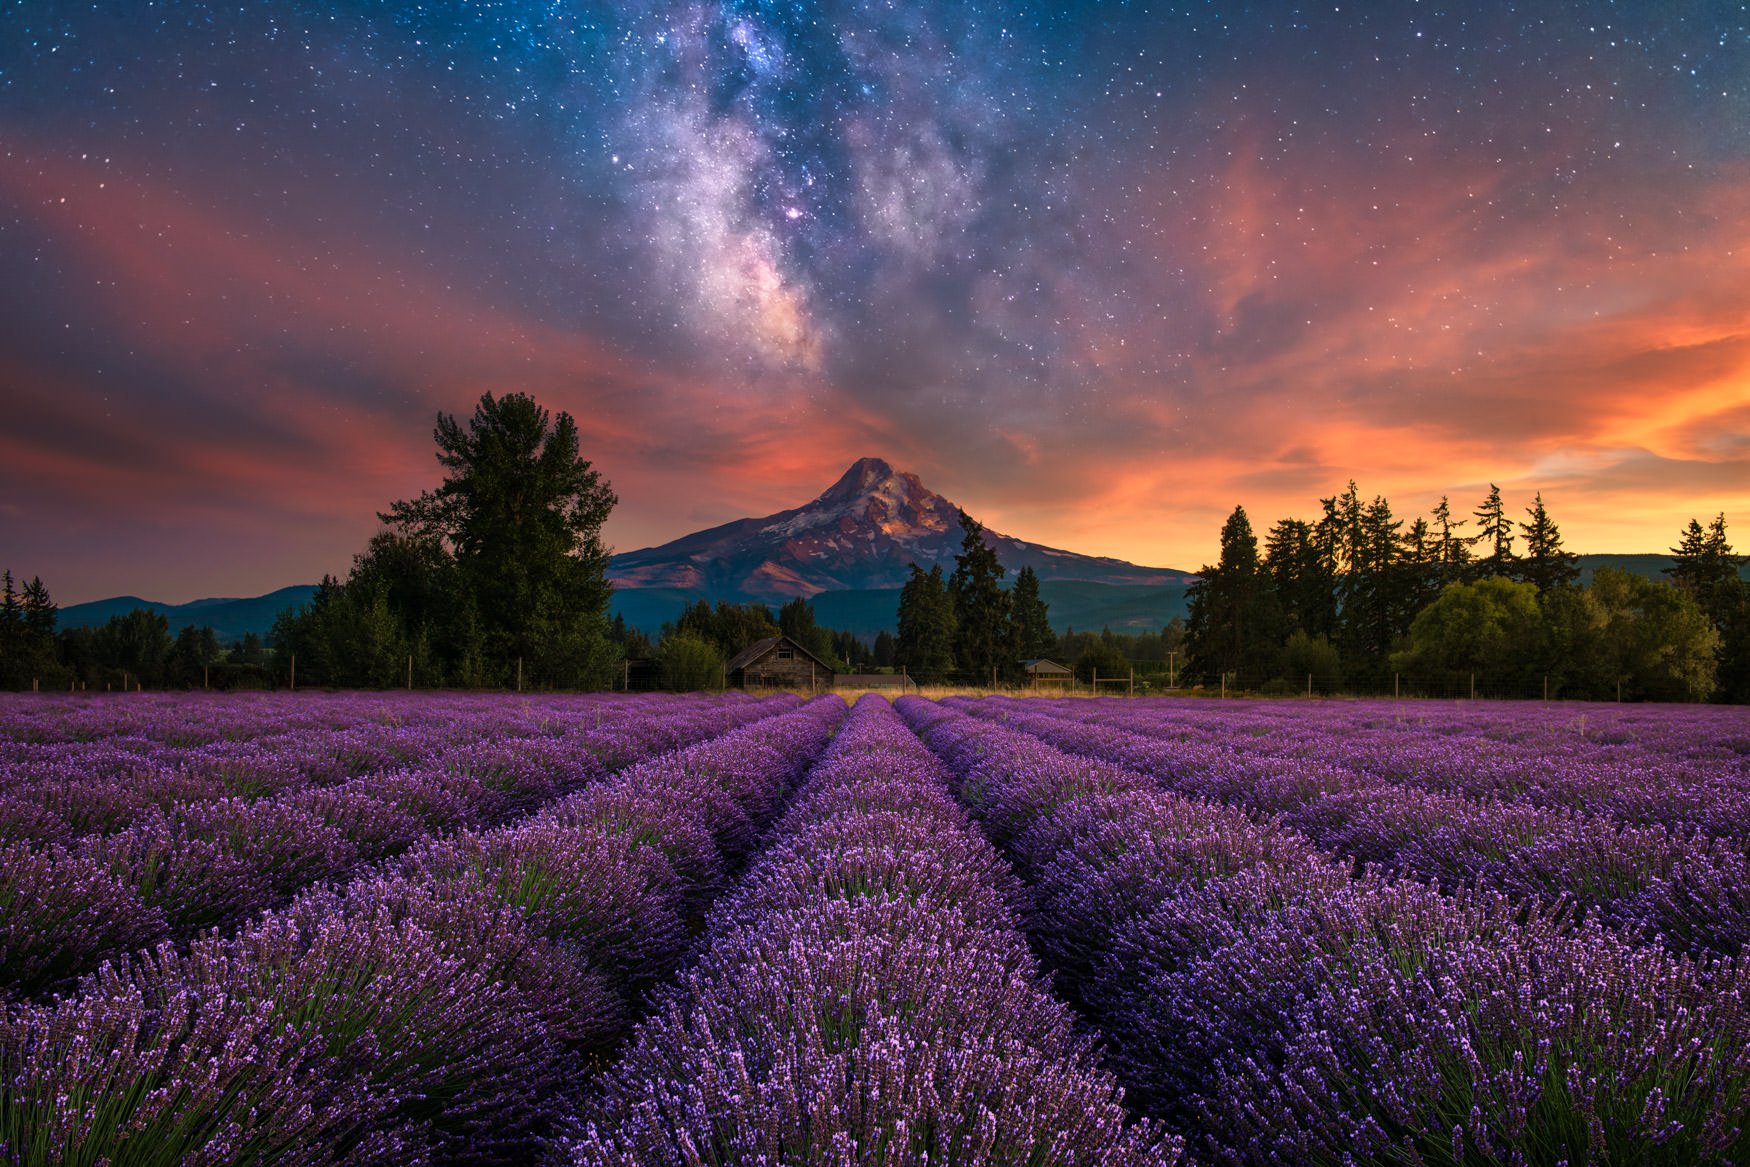 The Milky Way over a lavender field with Mt Hood in the background - photographed by Chris Byrne. | Photo Title: Believe In Magic | 
        Photo by Chris Byrne ©2023